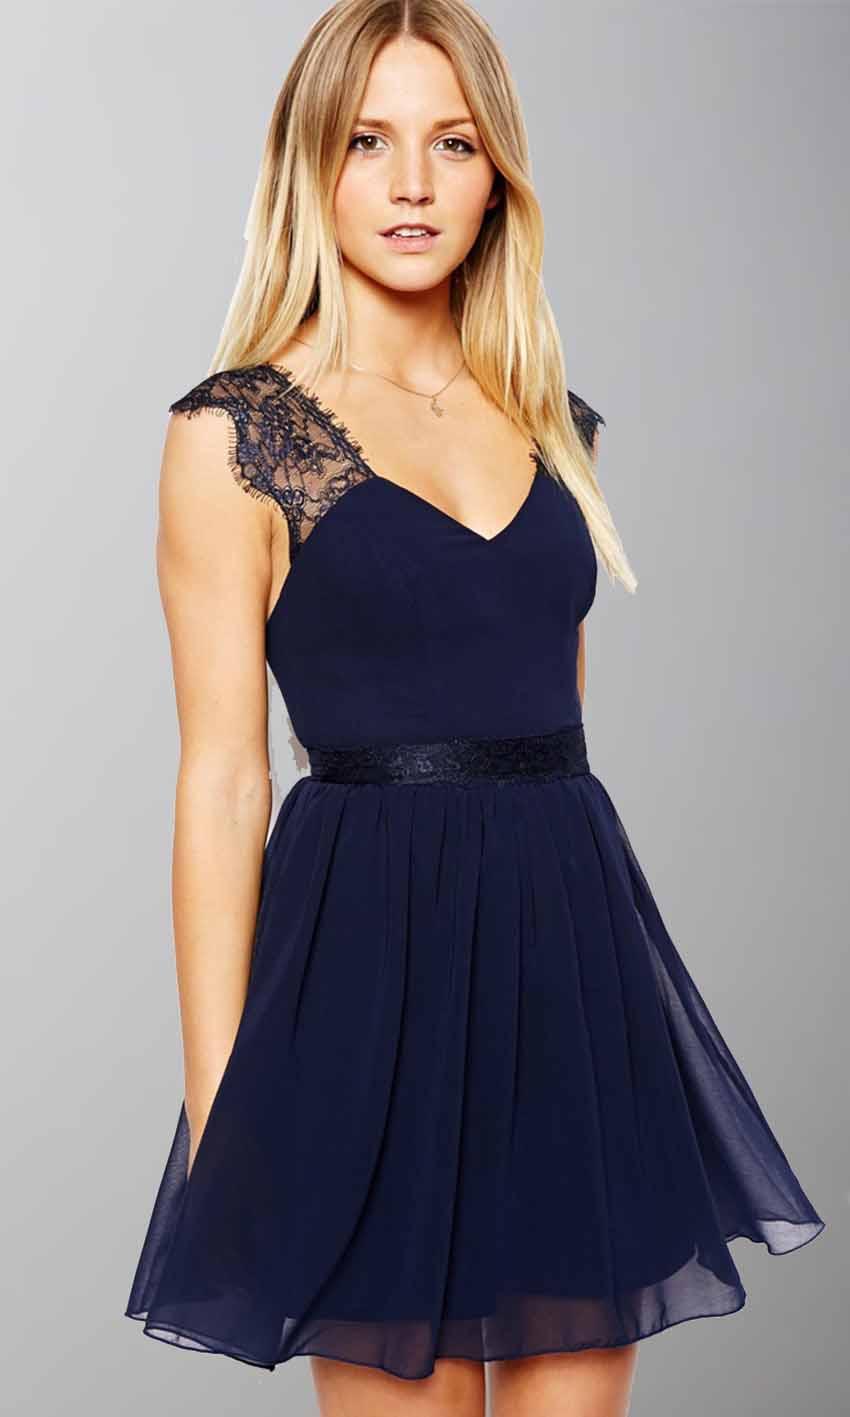 Wedding - Cute Lace Cap Sleeves V-neck Short Wedding party Dress KSP410 [KSP410] - £85.00 : Cheap Prom Dresses Uk, Bridesmaid Dresses, 2014 Prom & Evening Dresses, Look for cheap elegant prom dresses 2014, cocktail gowns, or dresses for special occasions? kissprom.